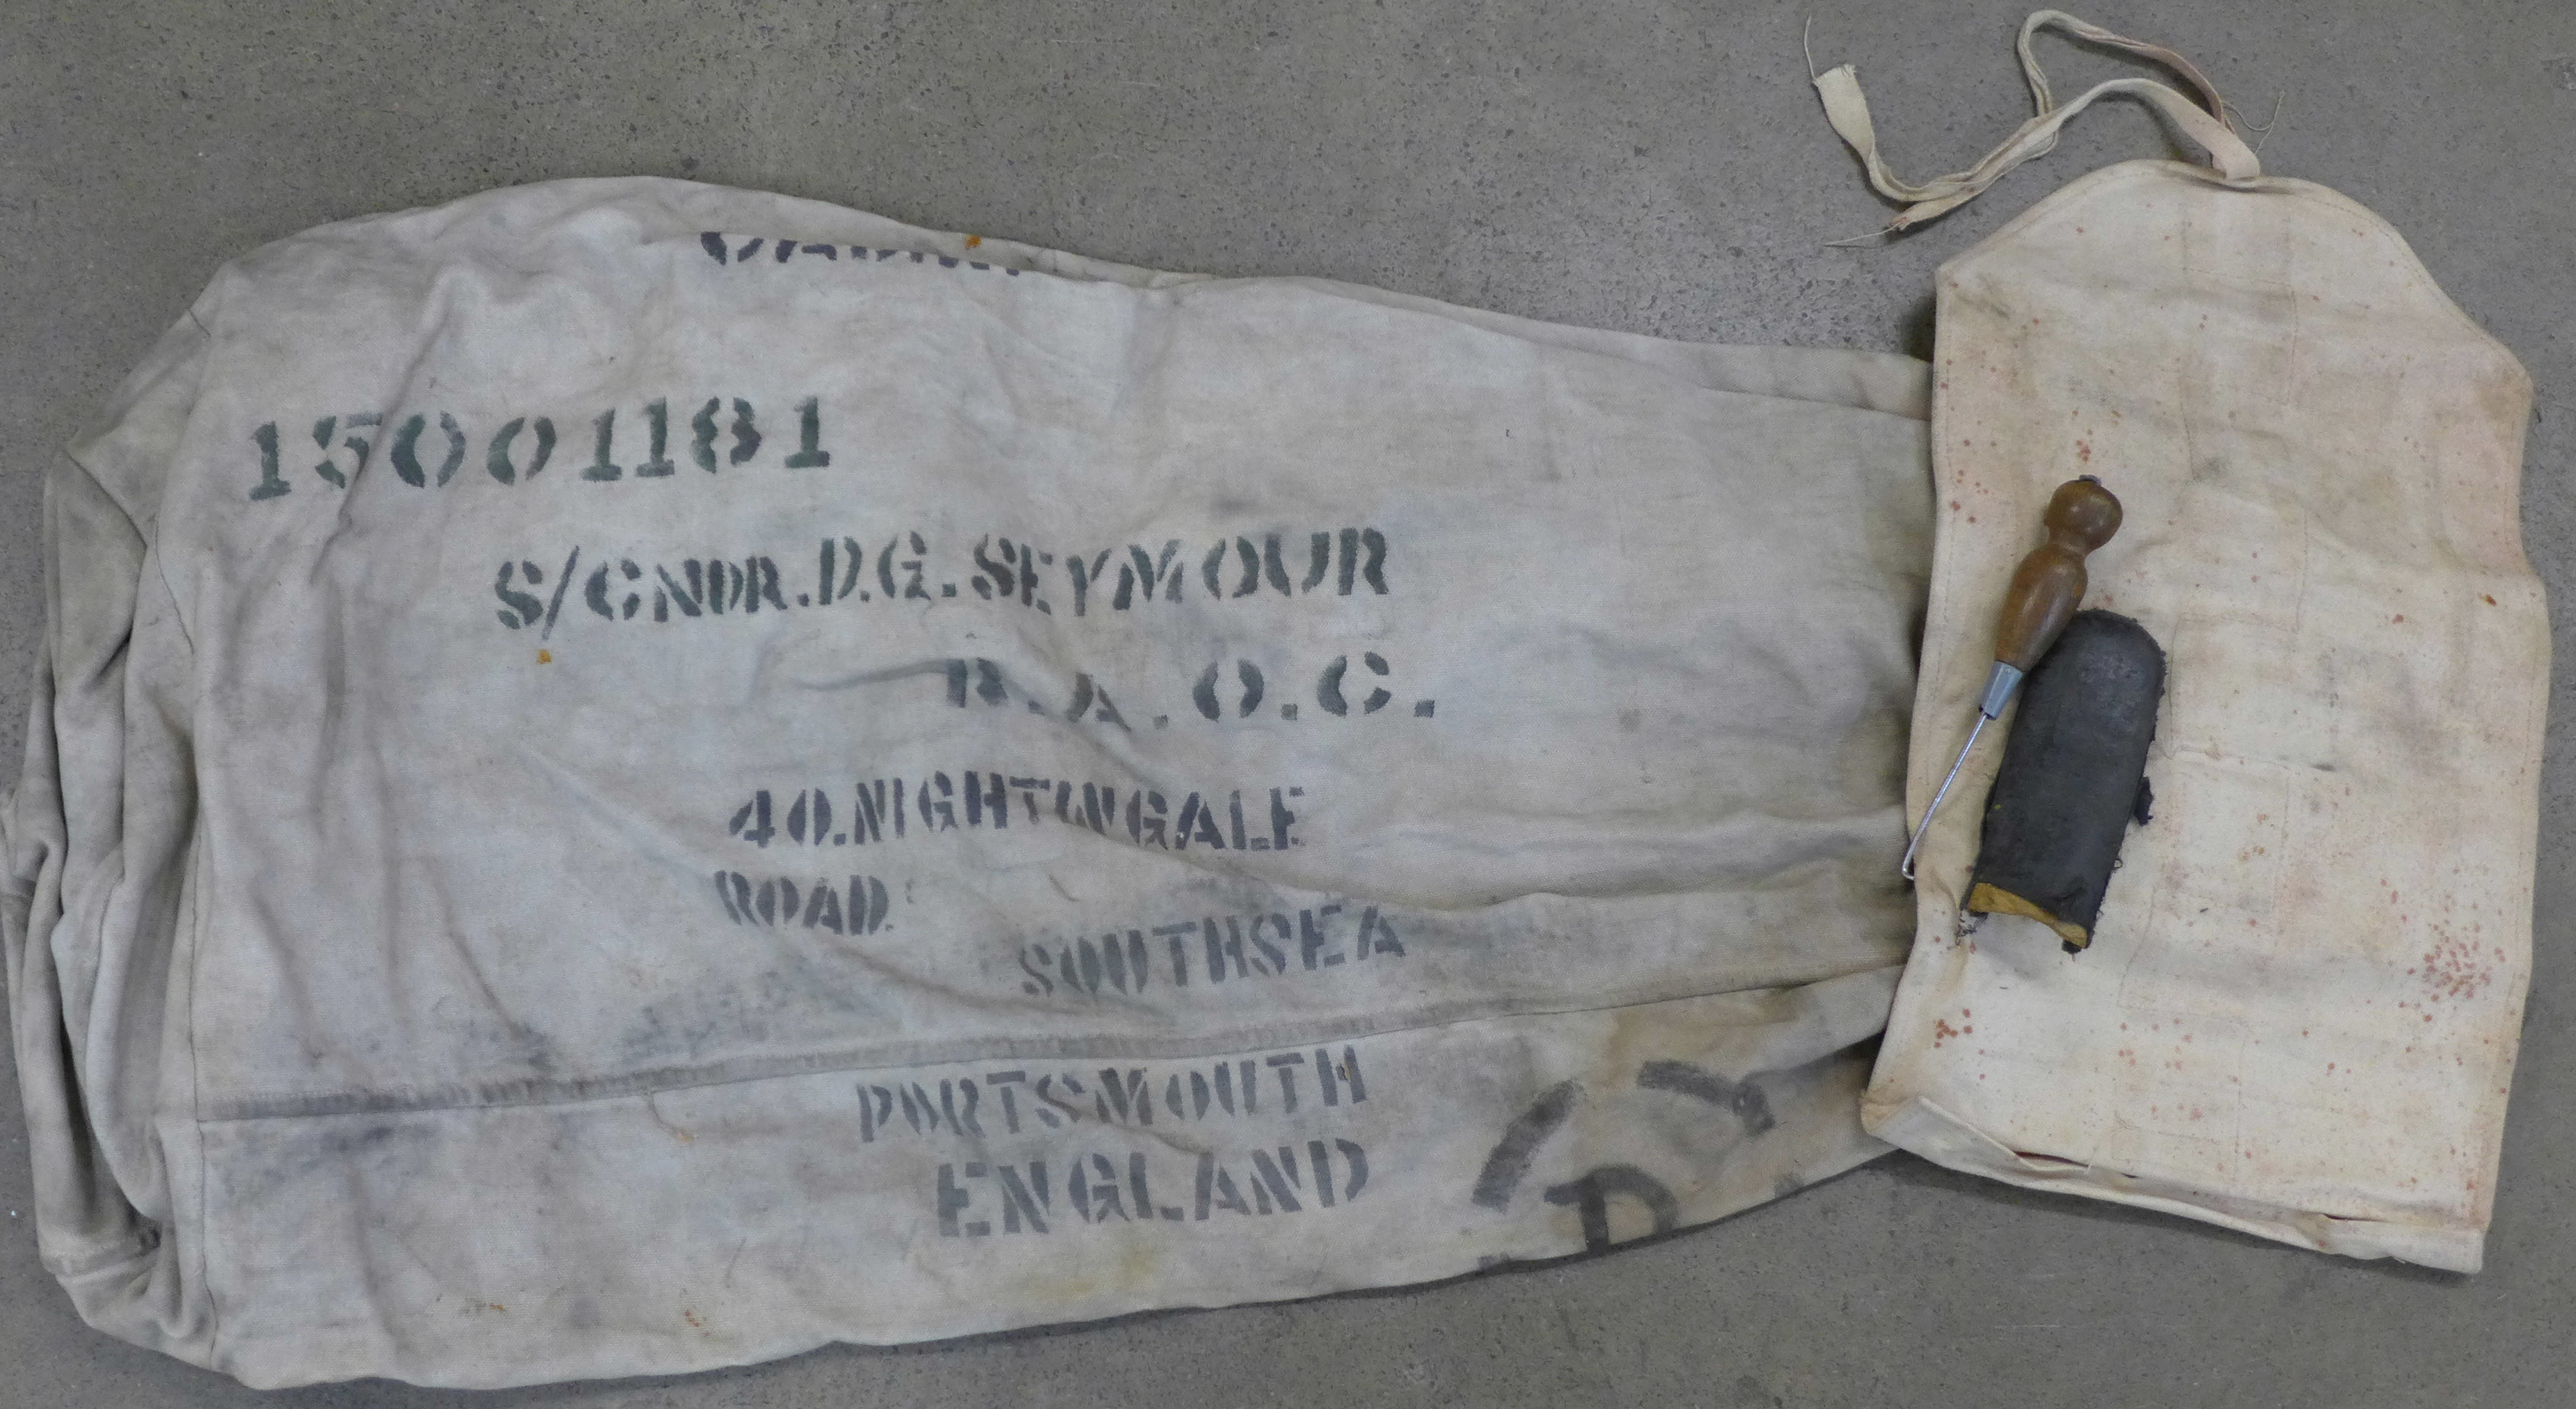 A WWII kit bag with 'D' ring and wash bag, to S/Cndr. D.G. Seymour R.A.O.C.